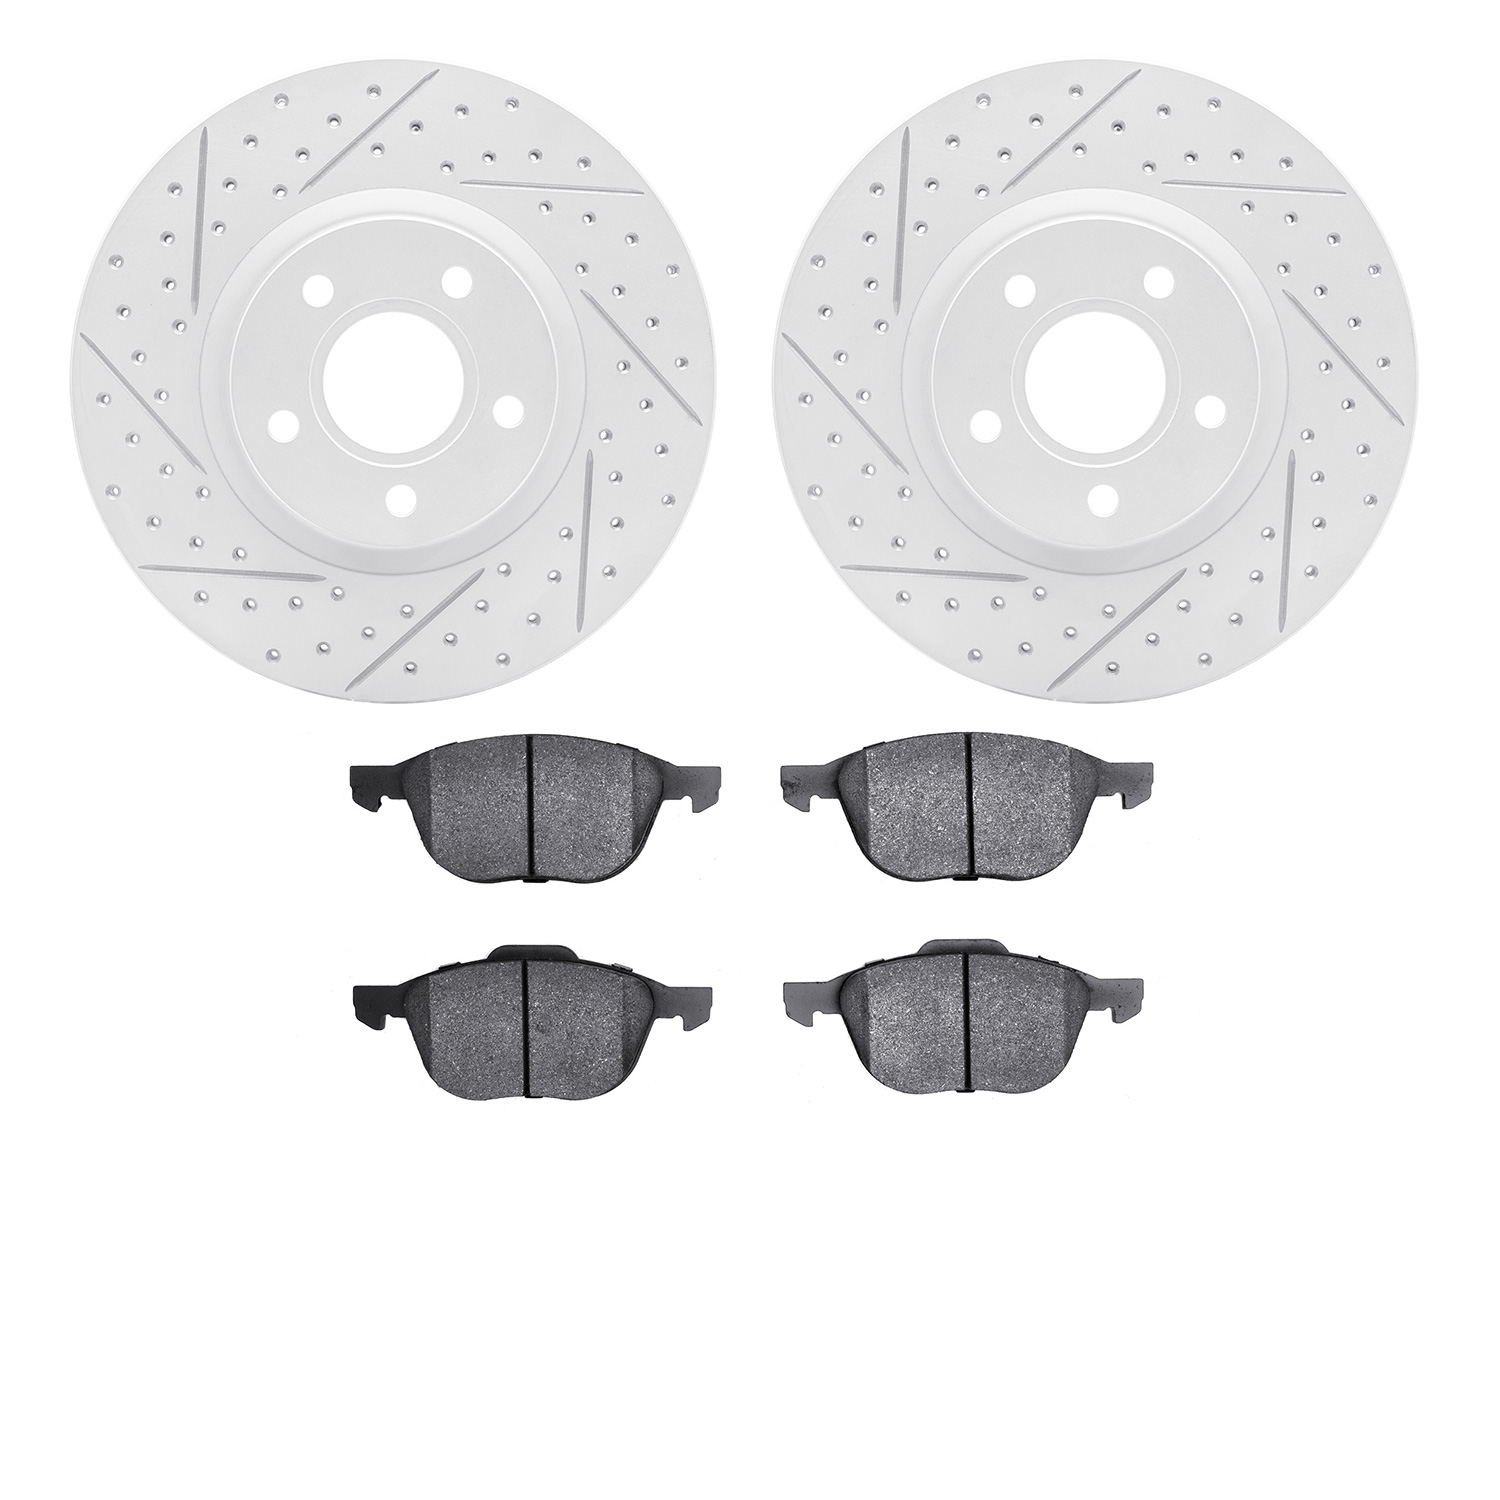 2502-54167 Geoperformance Drilled/Slotted Rotors w/5000 Advanced Brake Pads Kit, 2004-2013 Volvo, Position: Front